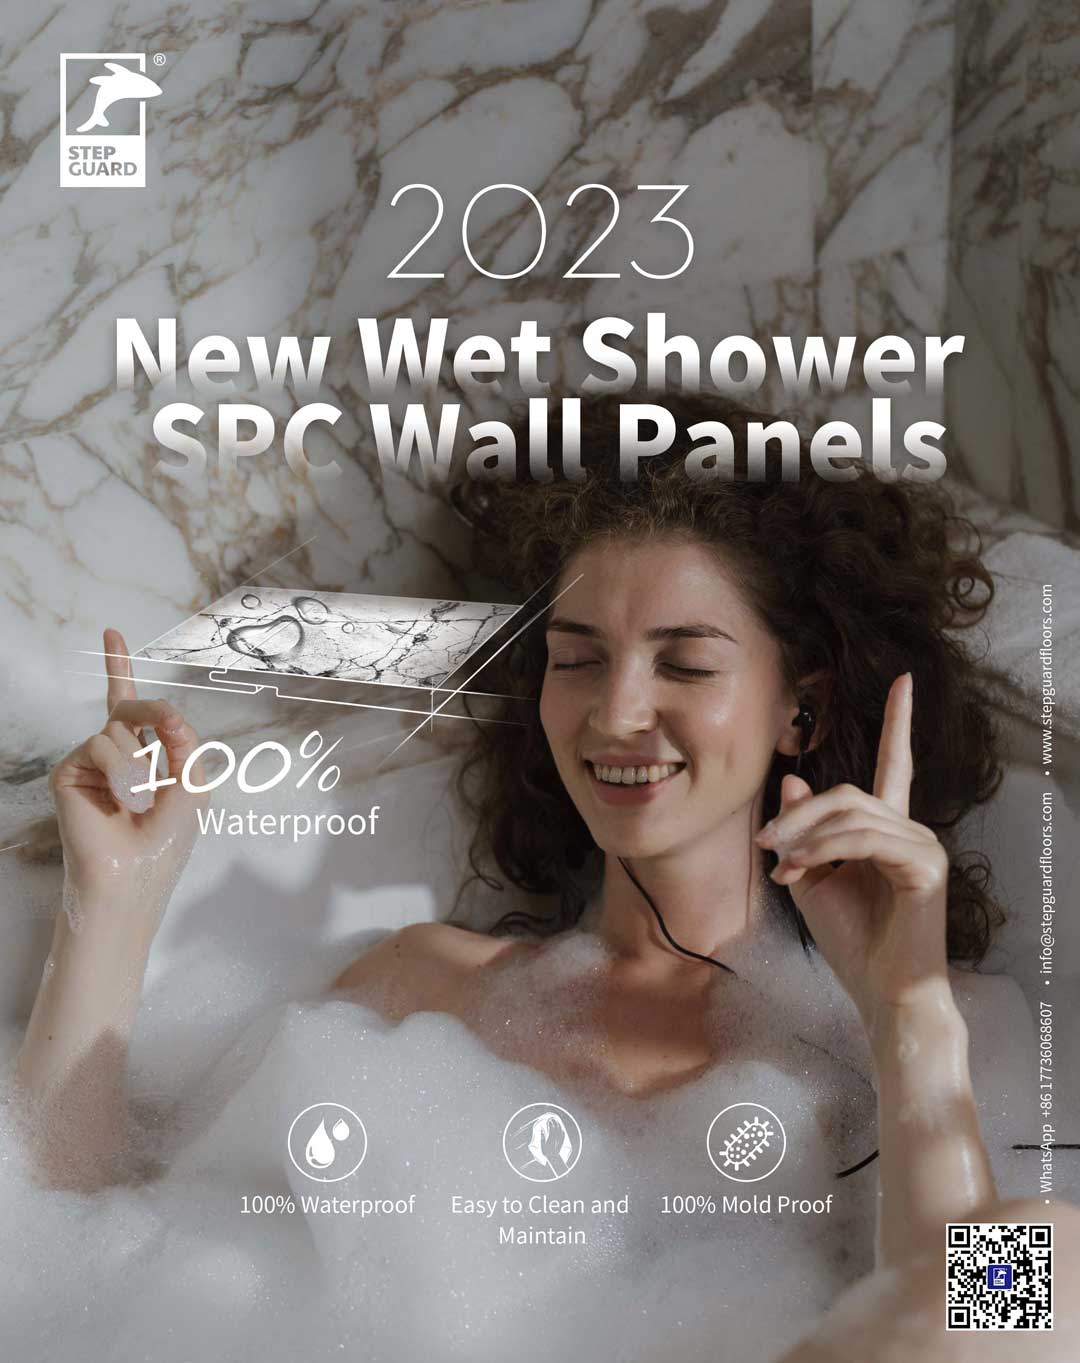 Shower Bathroom Wall Panels System – One Solution for All Your Needs